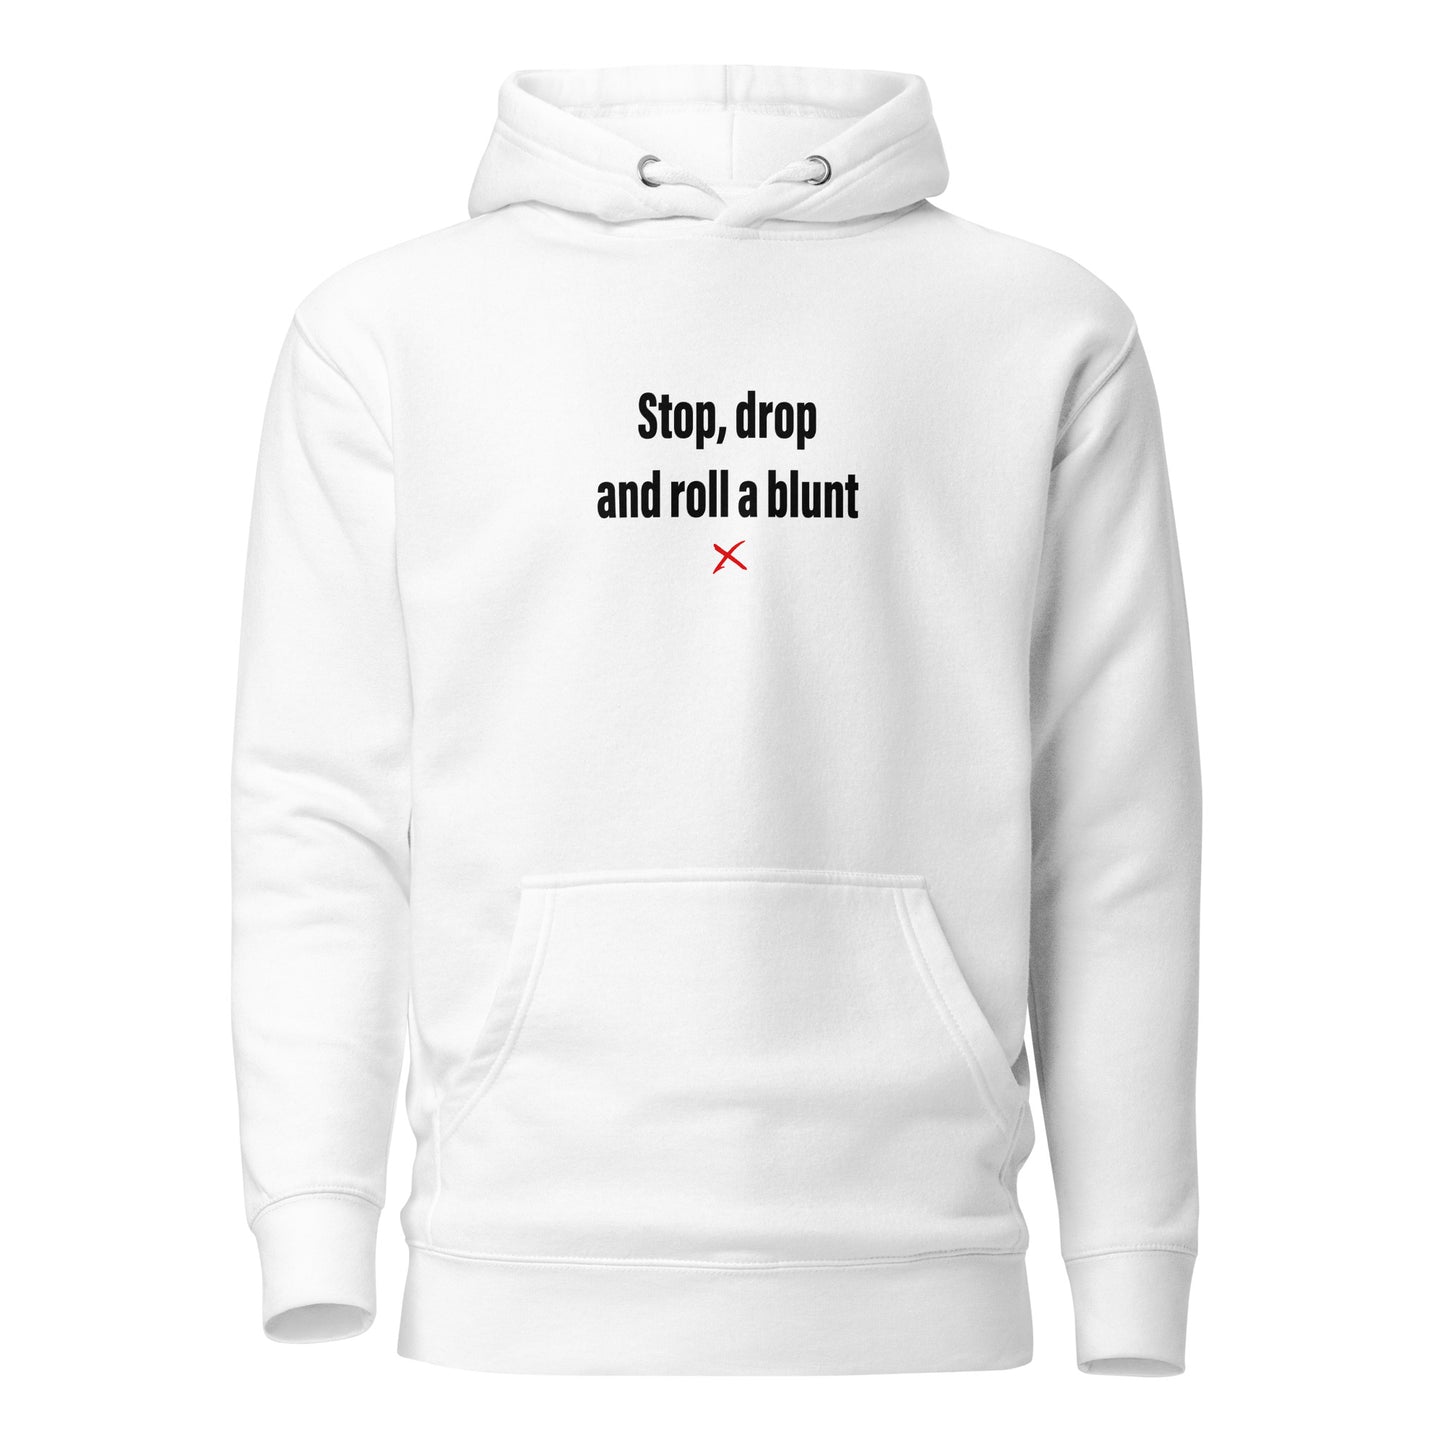 Stop, drop and roll a blunt - Hoodie